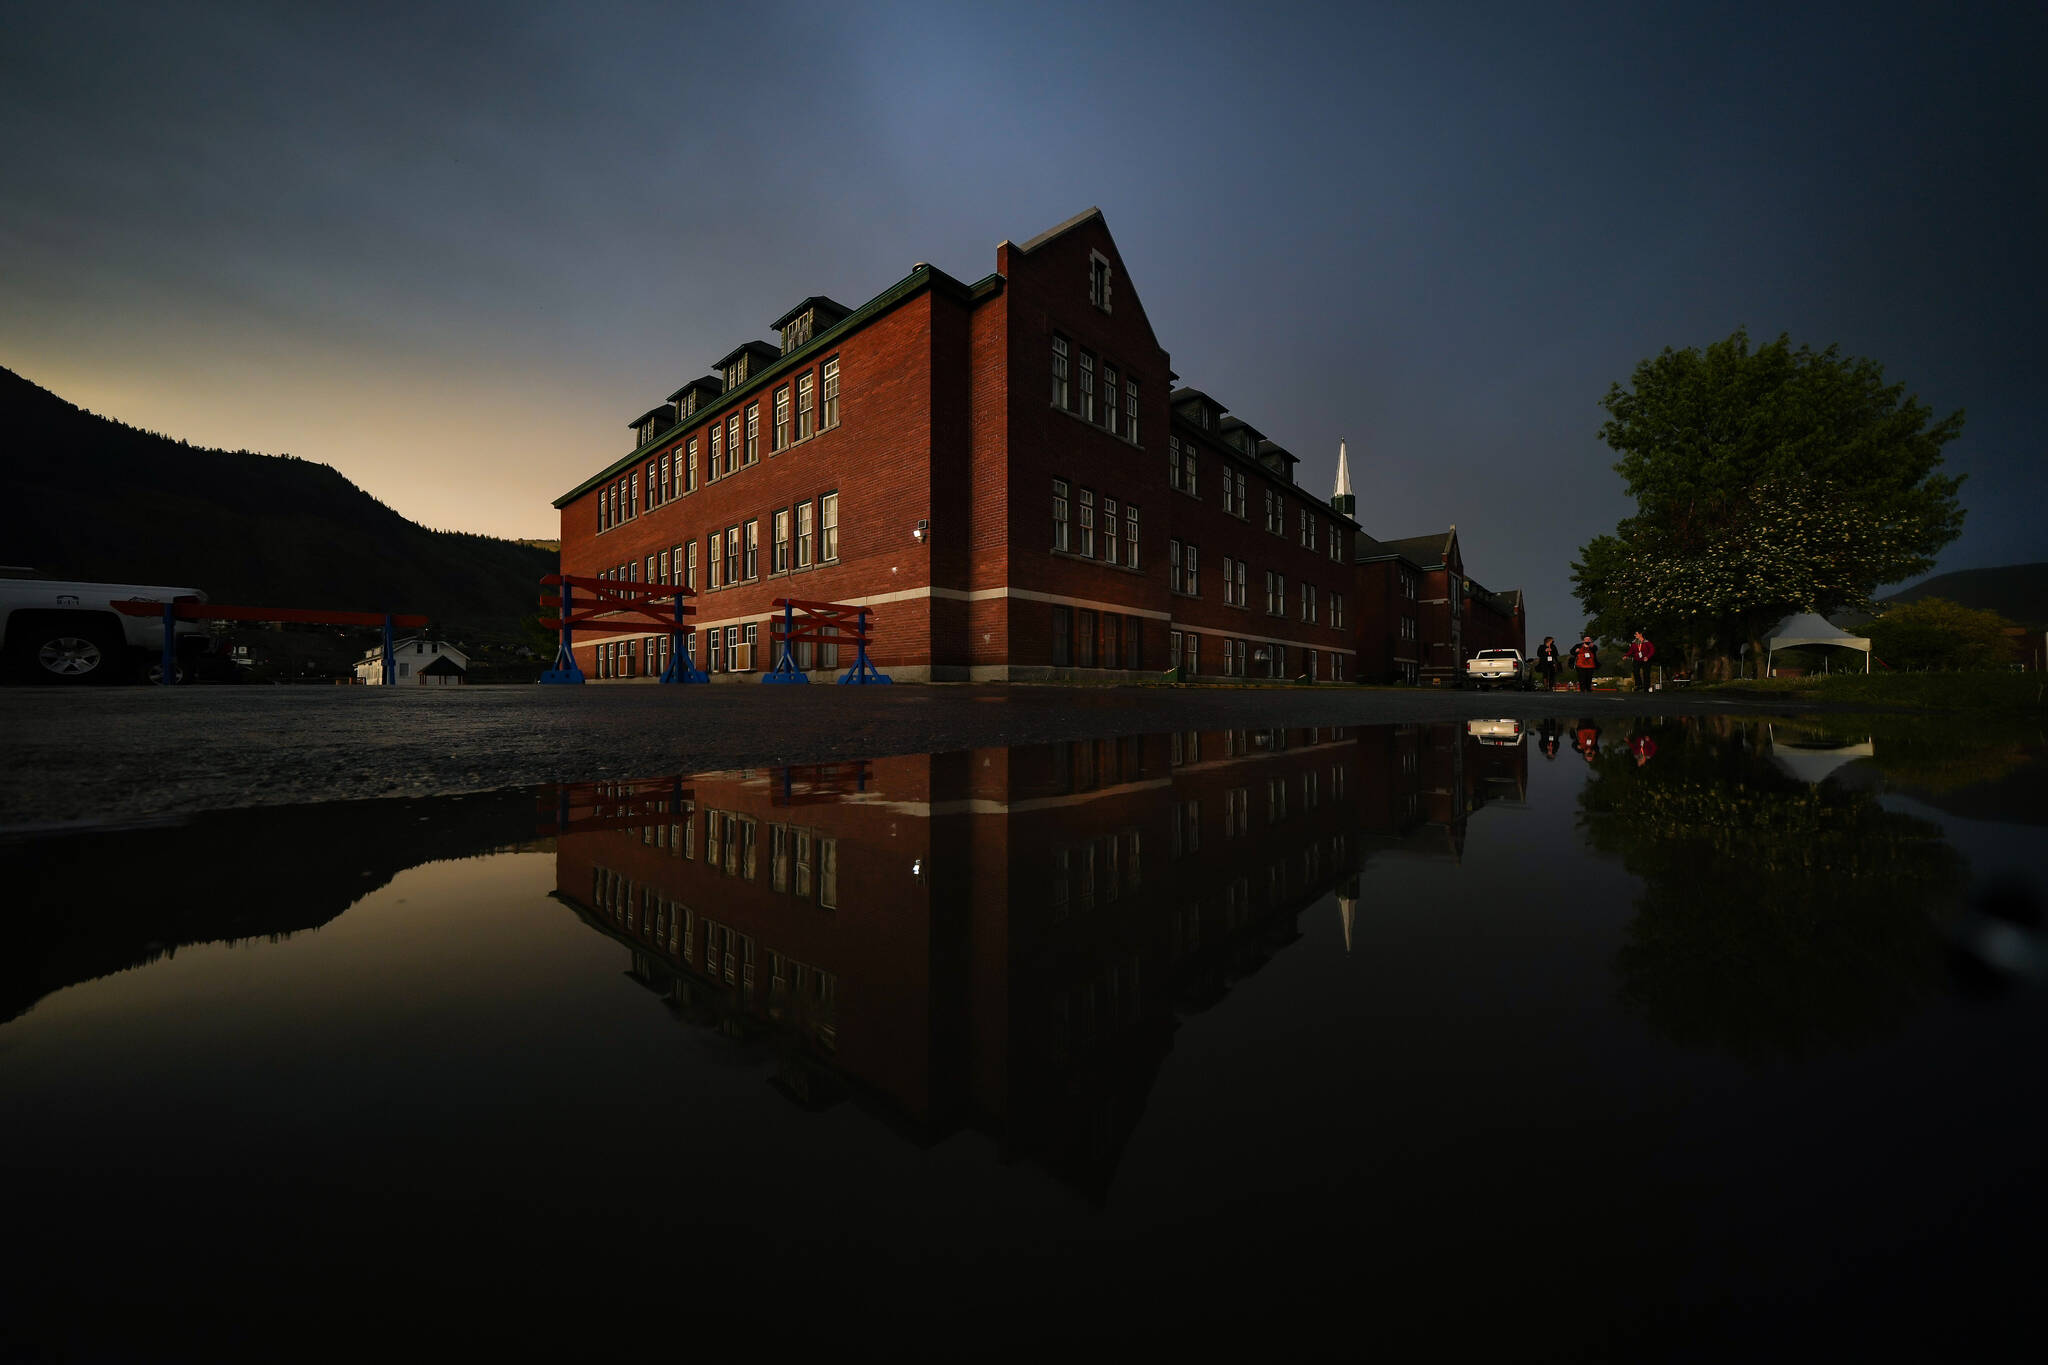 The former Kamloops Indian Residential School is seen at sunset after a rainstorm and a day-long ceremony to mark the one-year anniversary of the Tk’emlups te Secwepemc announcement of the detection of the remains of 215 children at an unmarked burial site at the former residential school, in Kamloops, B.C., on Monday, May 23, 2022. THE CANADIAN PRESS/Darryl Dyck